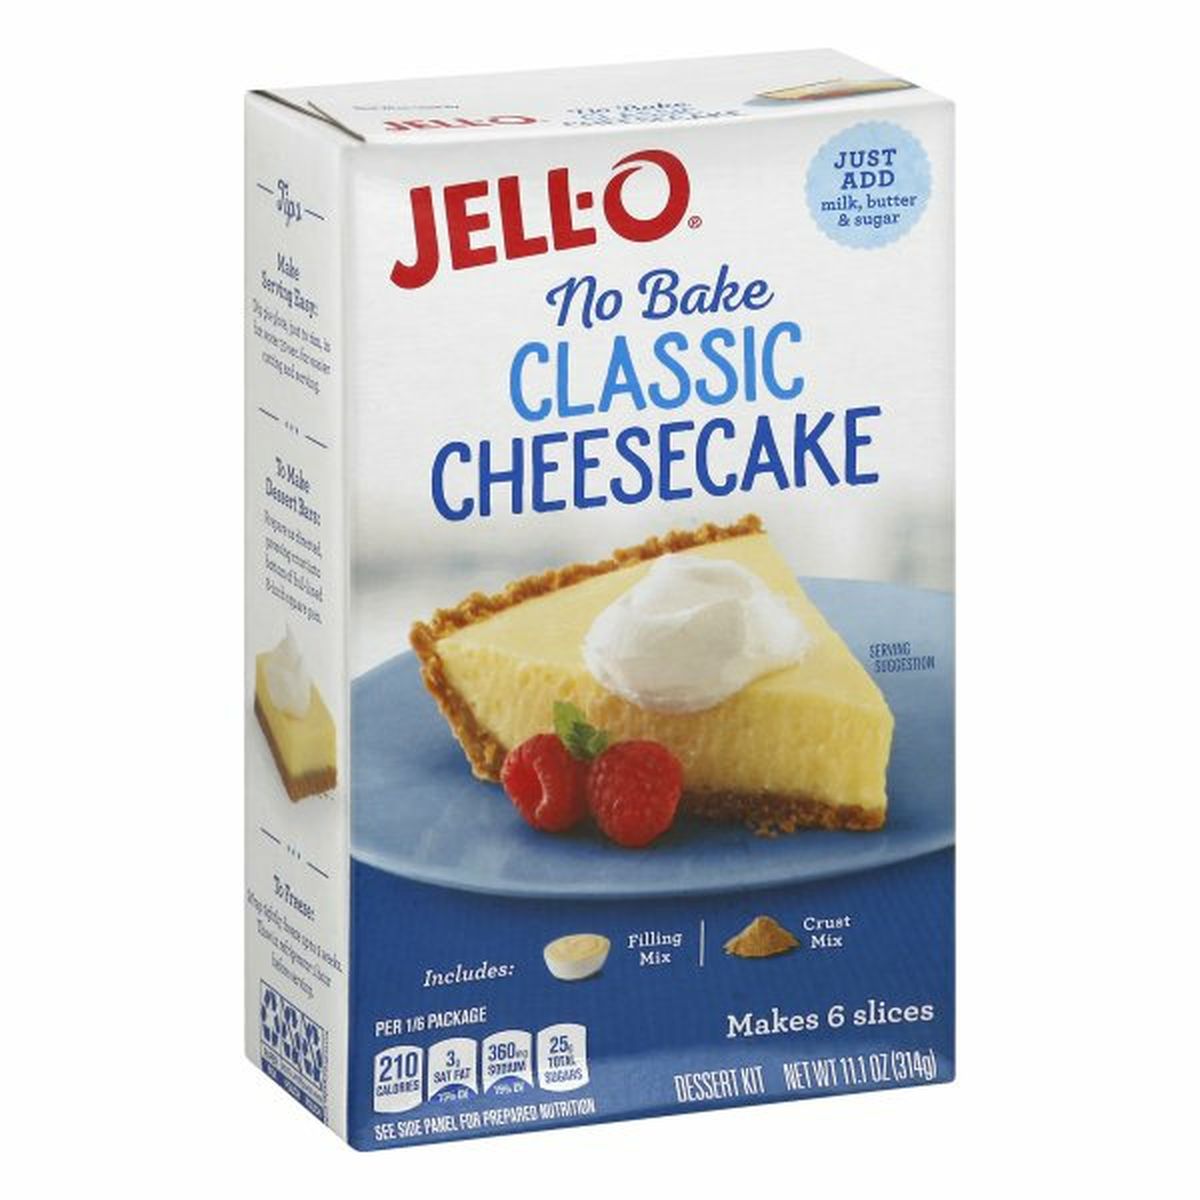 Calories in Jell-O Dessert Kit, Classic Cheesecake, No Bake